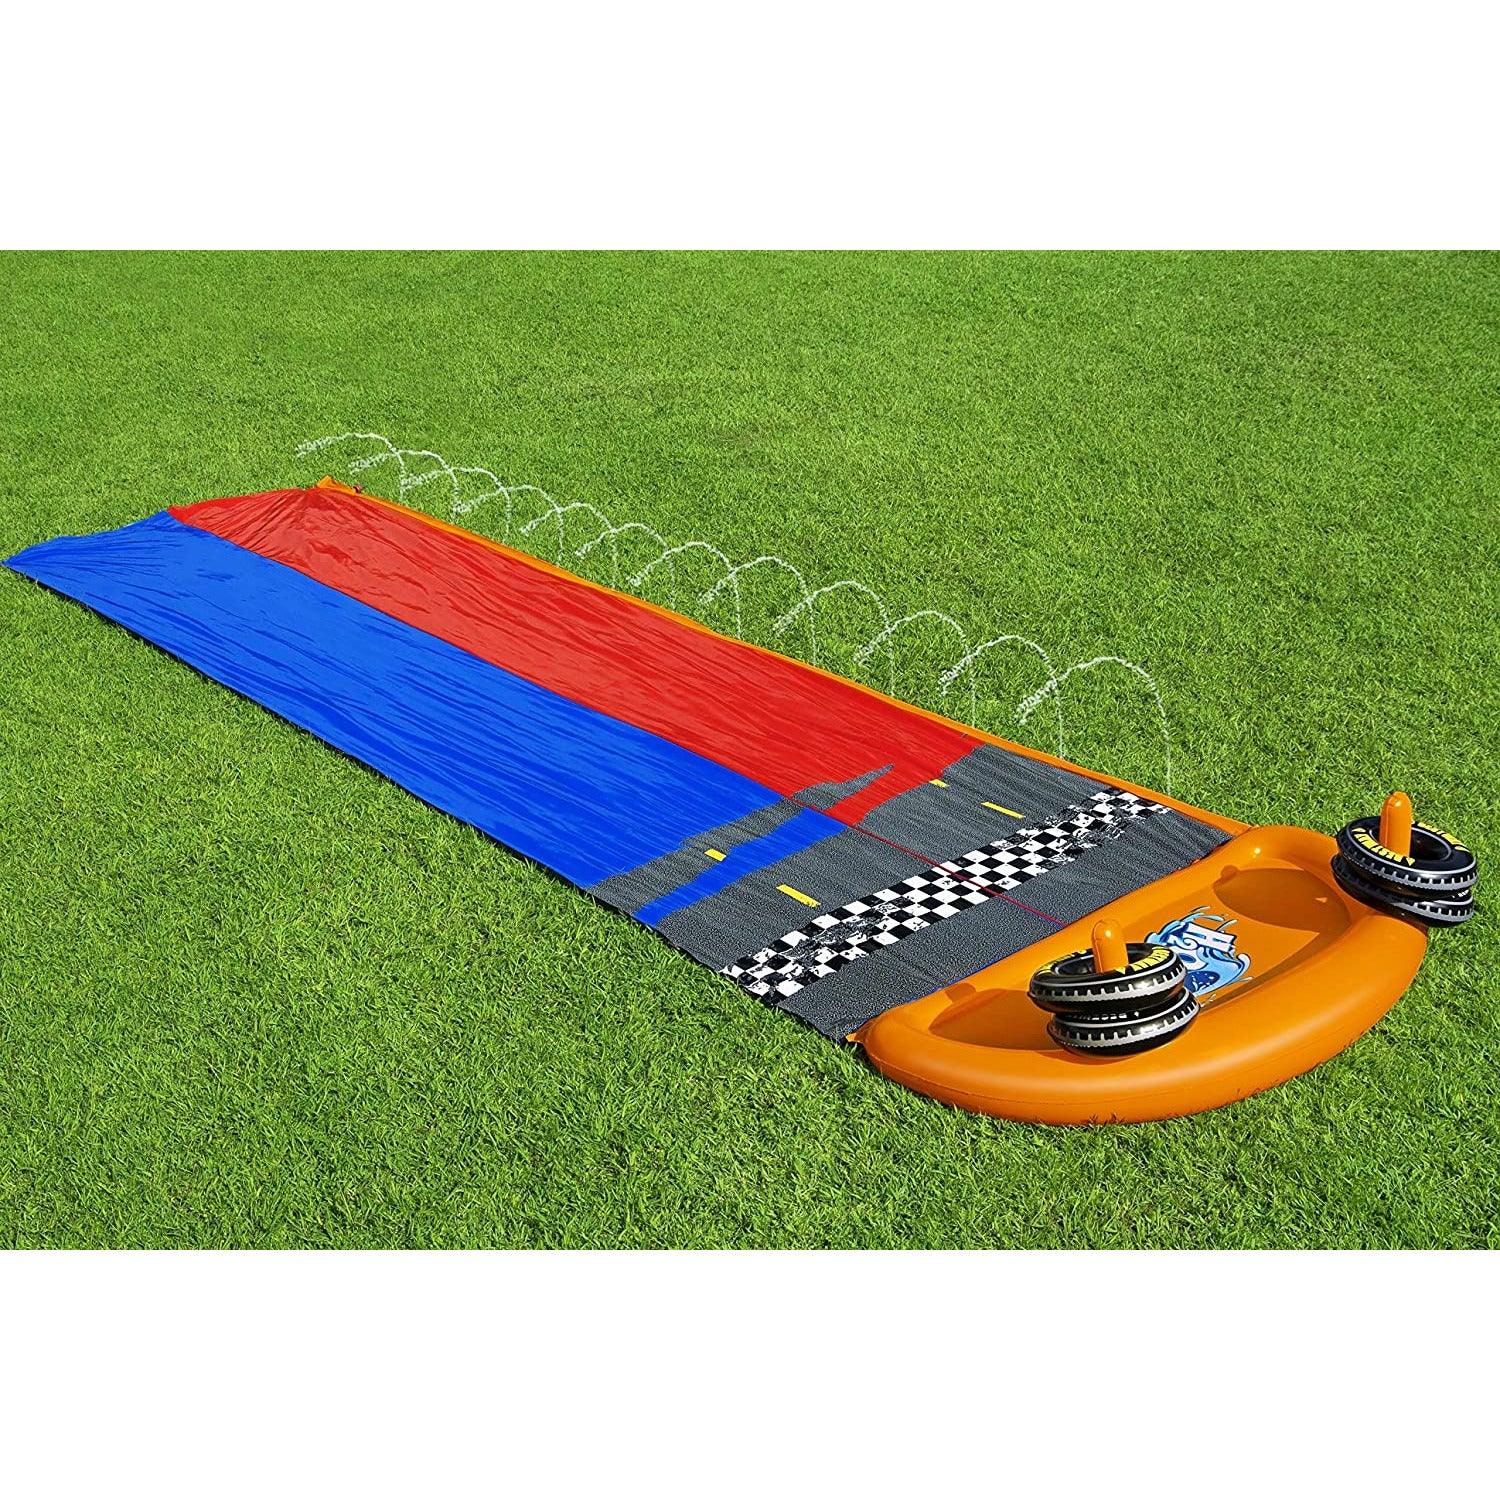 Bestway 52391 H2OGO Double Speedway is perfect for racing - BumbleToys - 5-7 Years, 8-13 Years, Bestway, Boys, Floaters, Girls, Sand Toys Pools & Inflatables